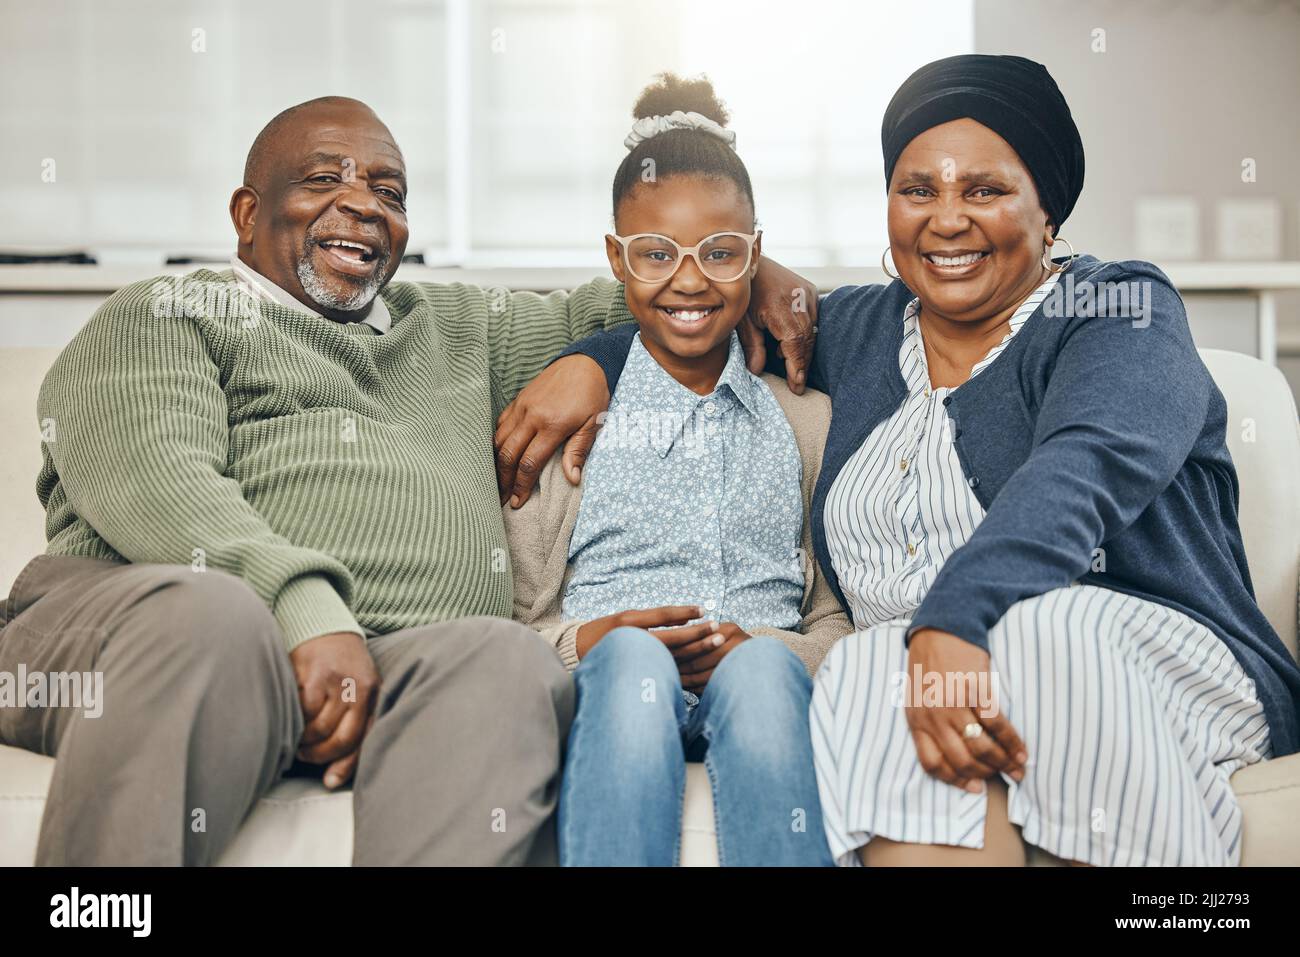 Passing on wisdom. two grandparents bonding with their grandchild on a sofa at home. Stock Photo